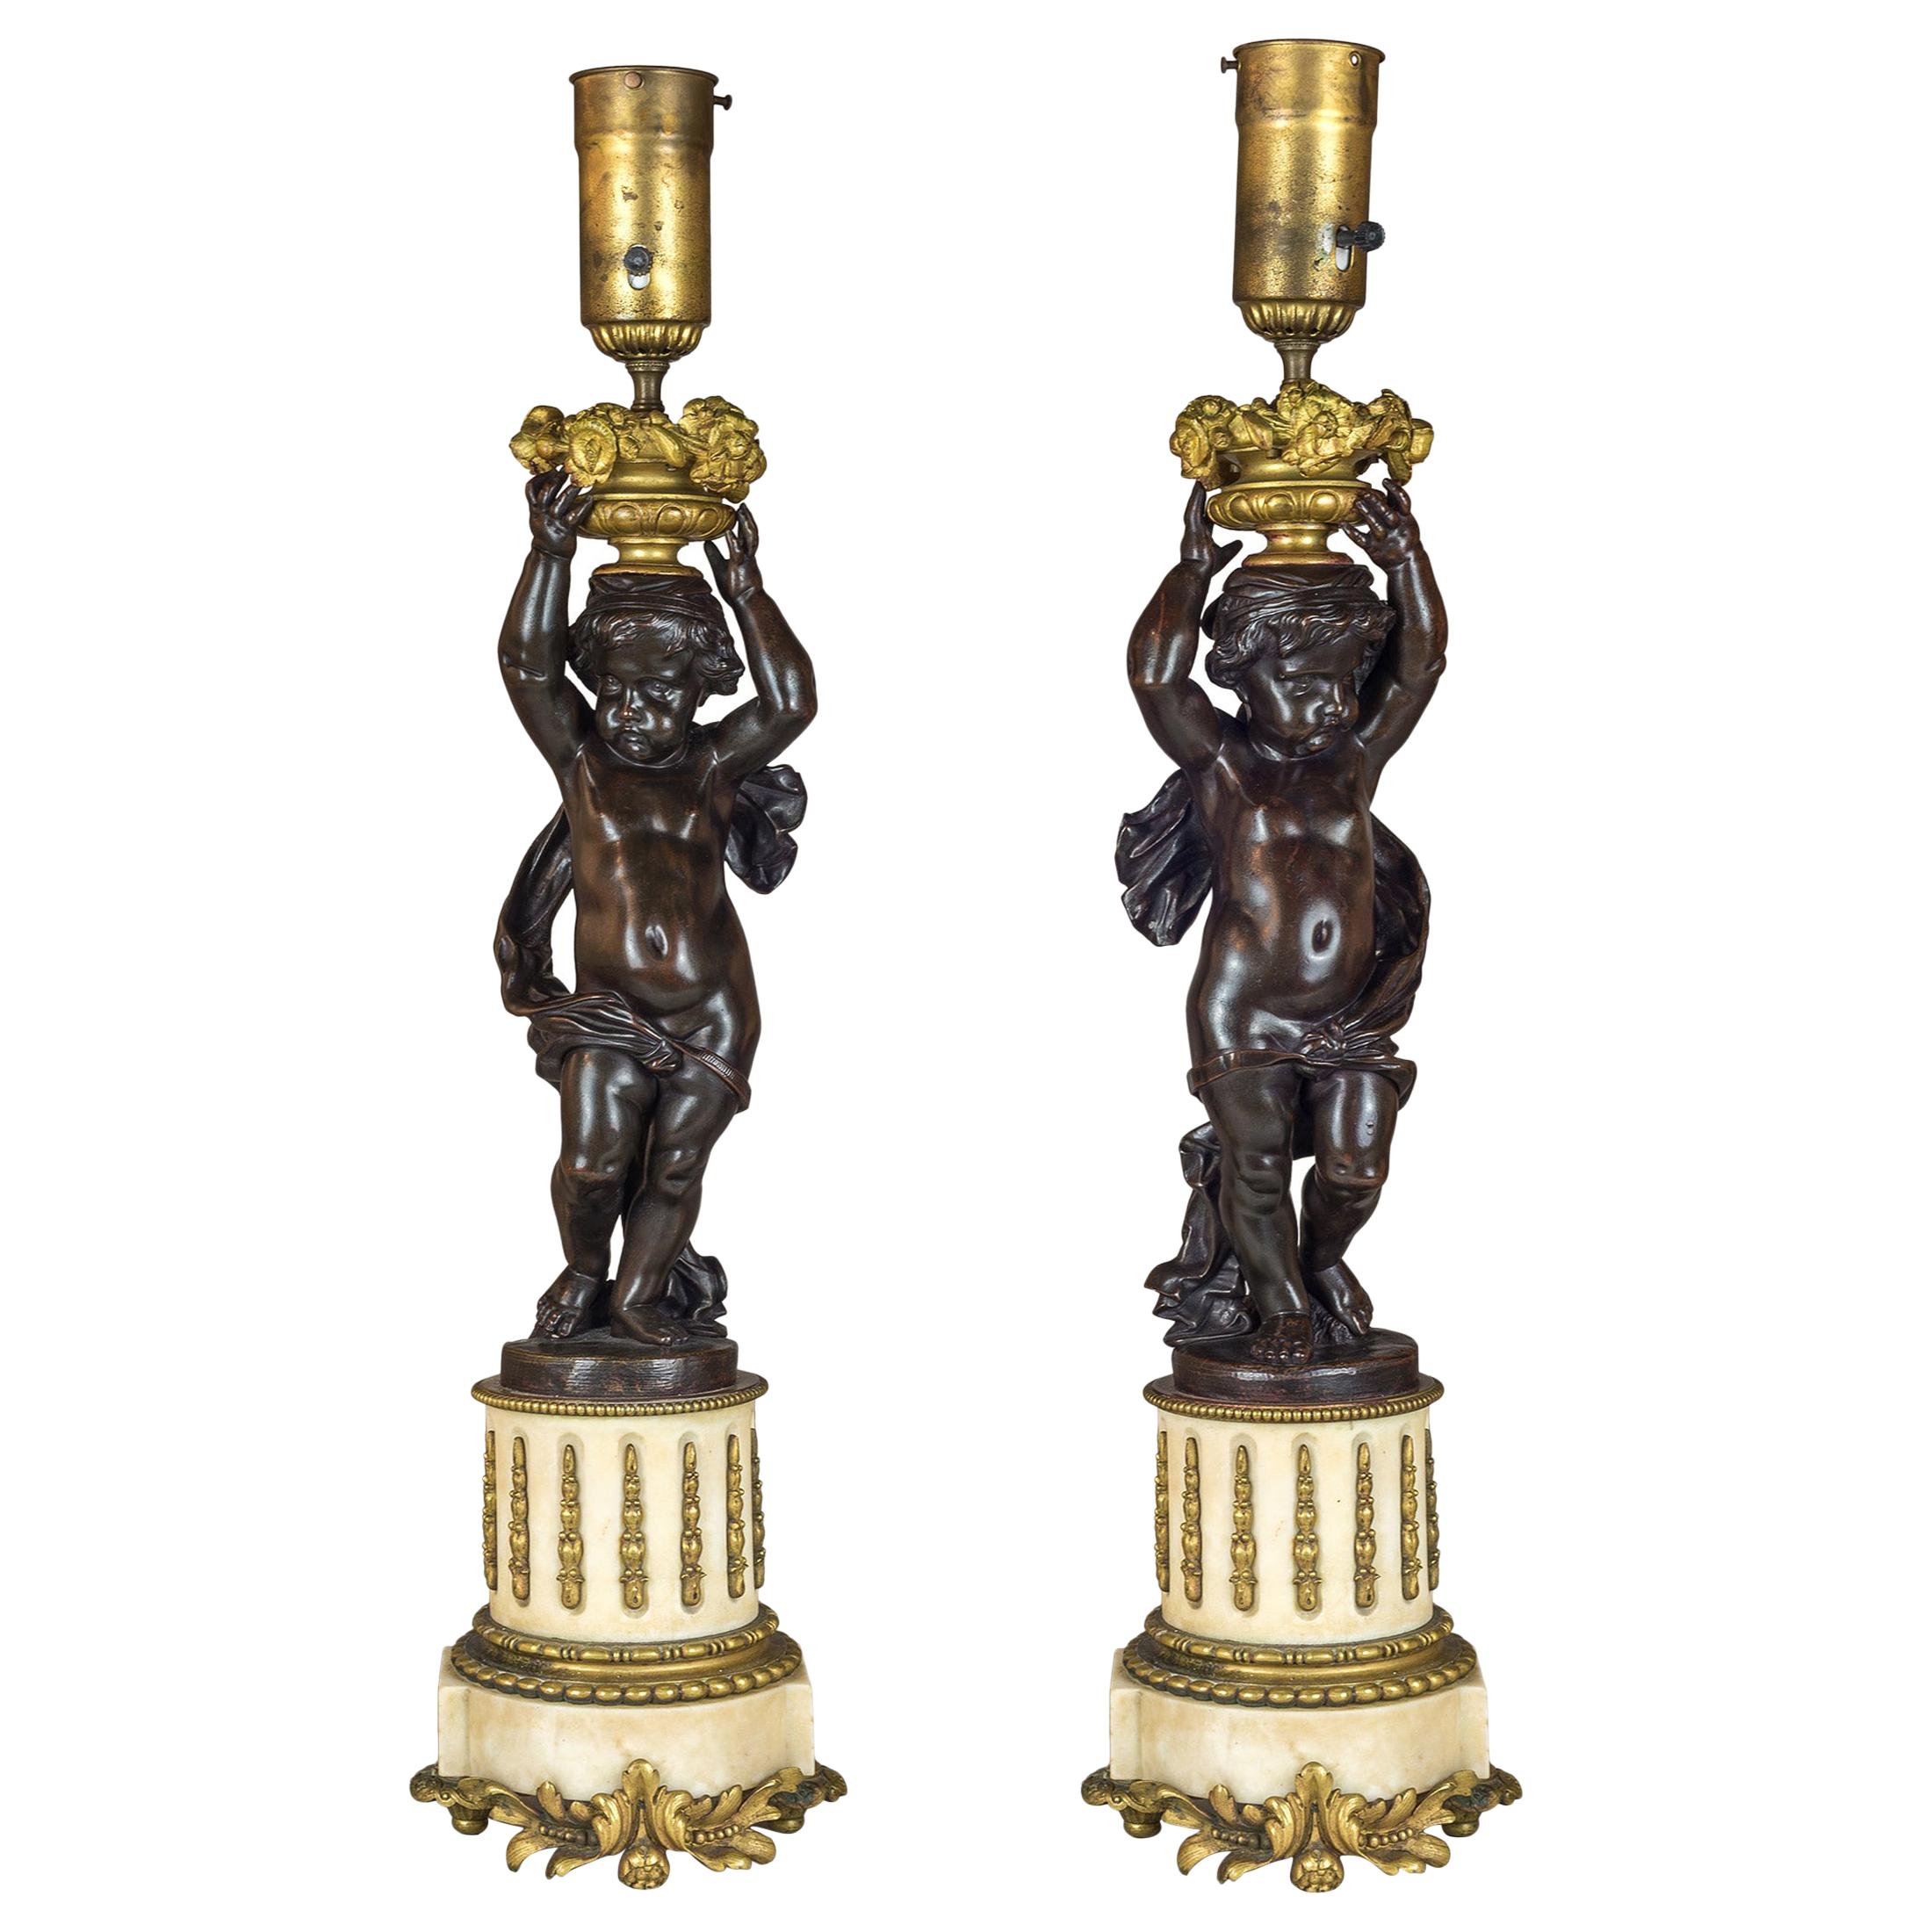 Pair of French Patinated Bronze and Gilt-Metal and Alabaster Figural Lamps